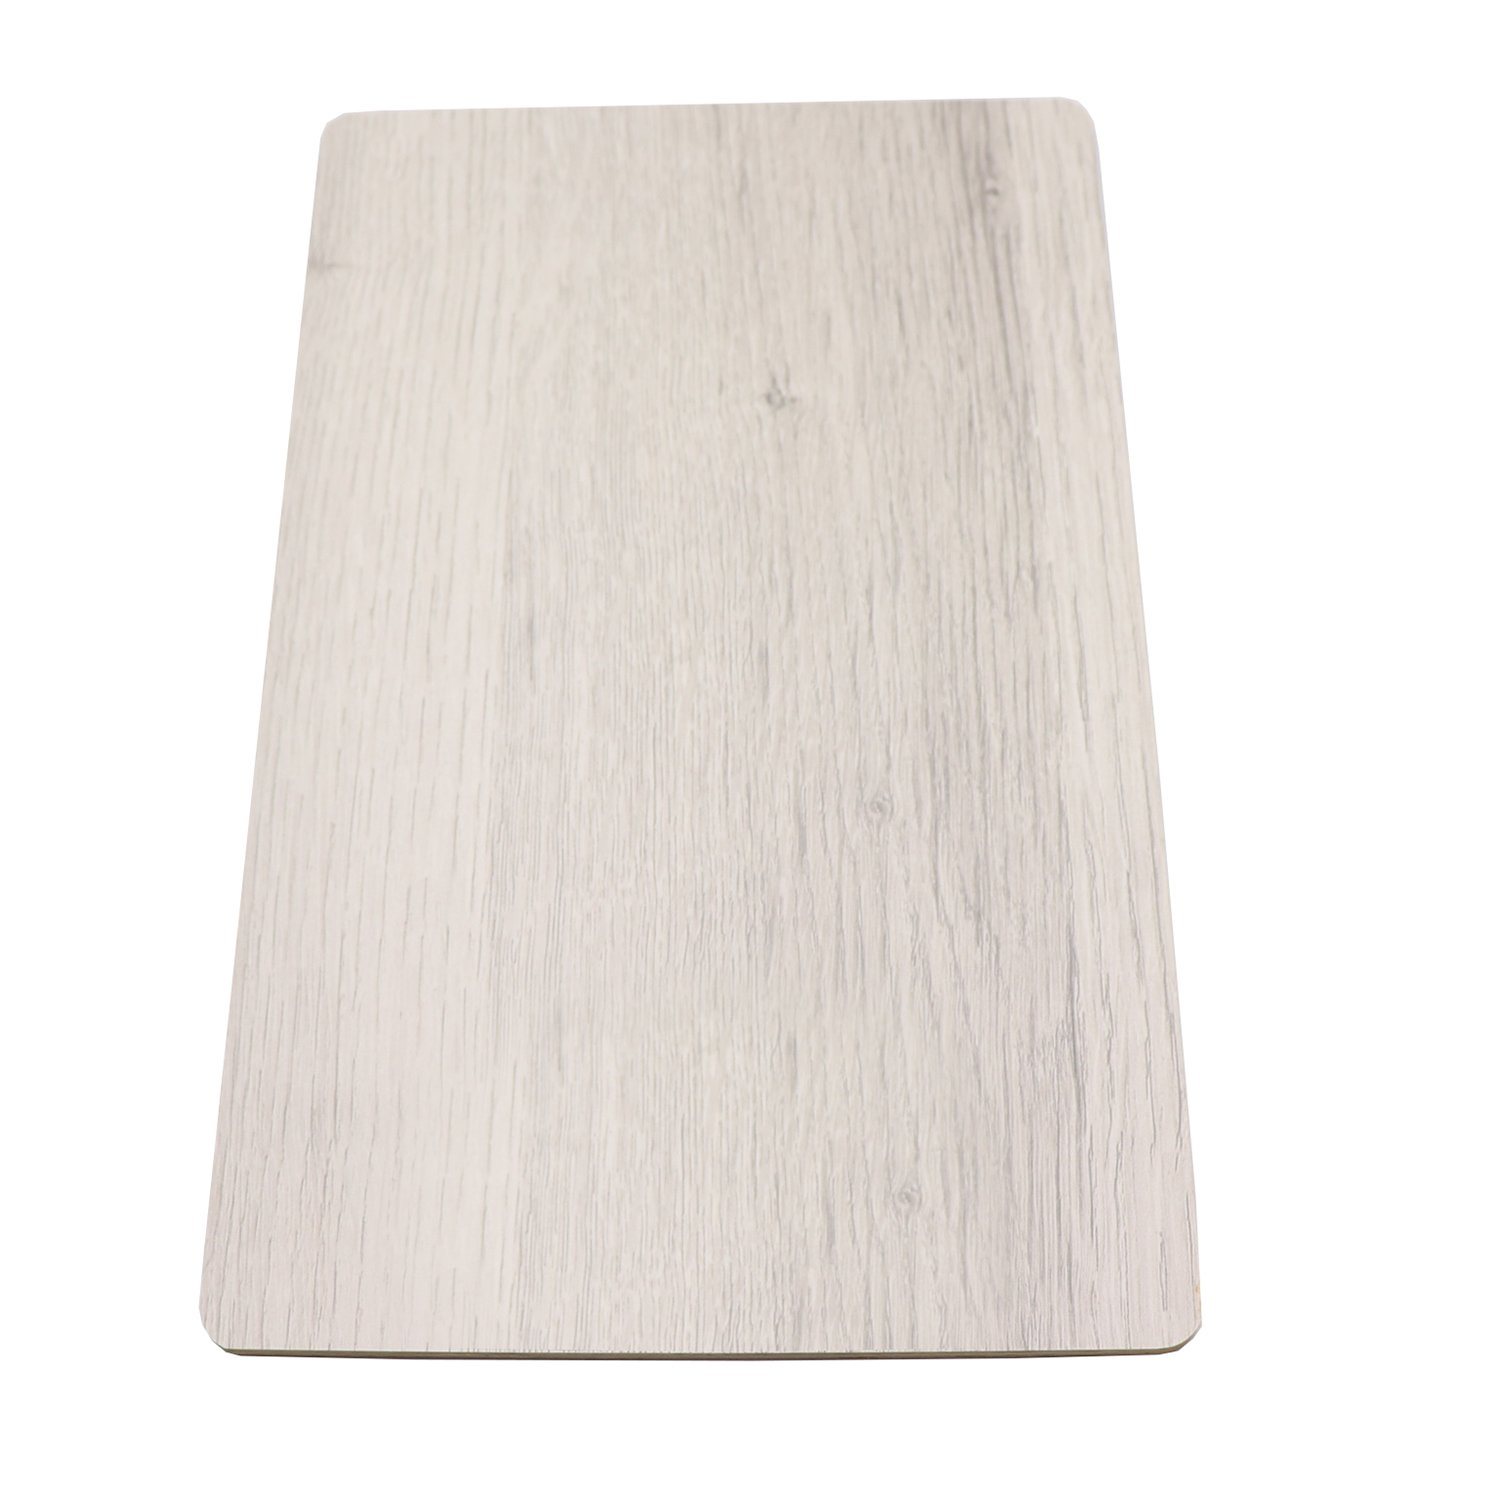 15mm Raw High Gloss Plain Chipboard Board / Medium Density Fiberboard Price / Fire Resistant and Moisture Proof Particle Board